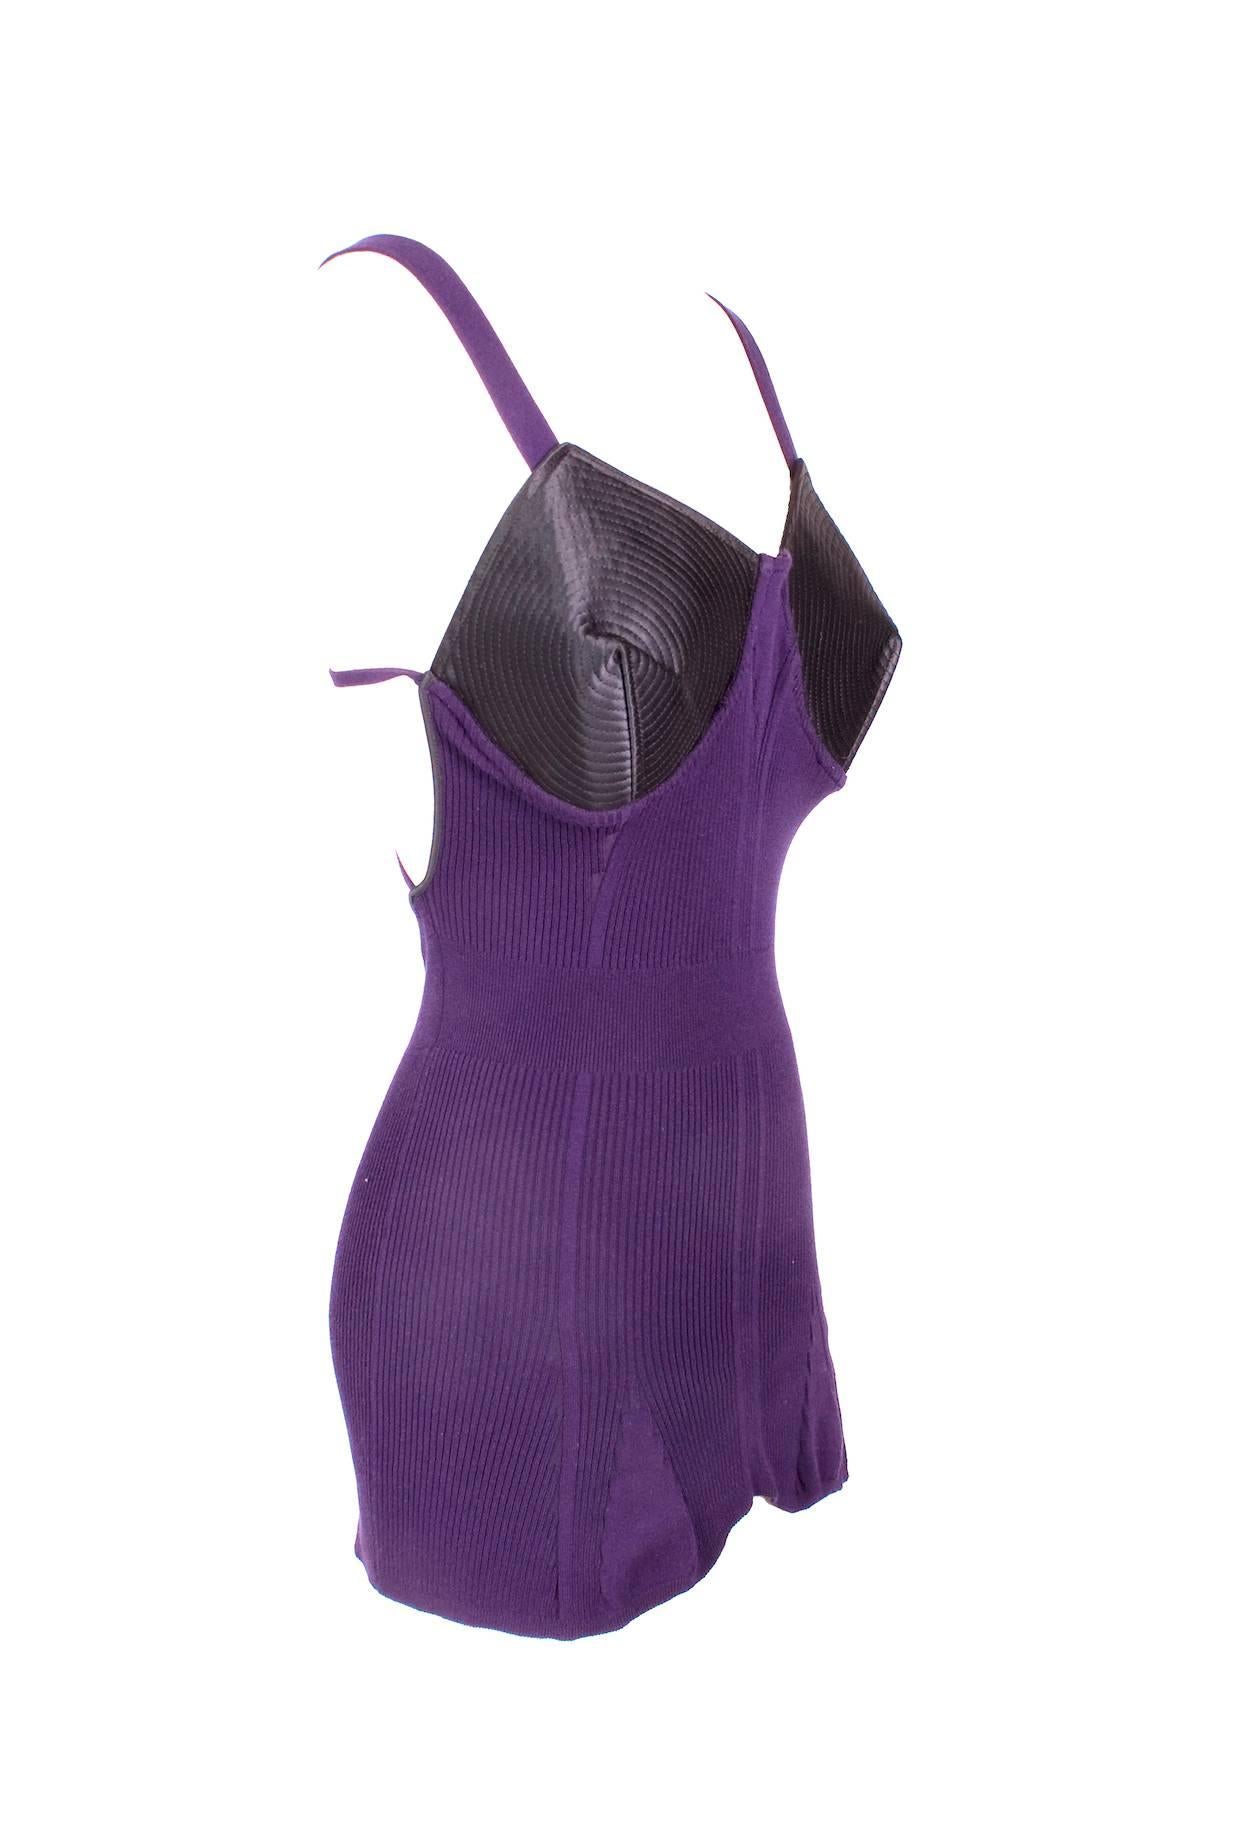 This is a purple tank top by Jean Paul Gaultier c. late 1980s/early 1990s.  It's made of a ribbed knit cotton with stretch and has built in cone bra cups.  